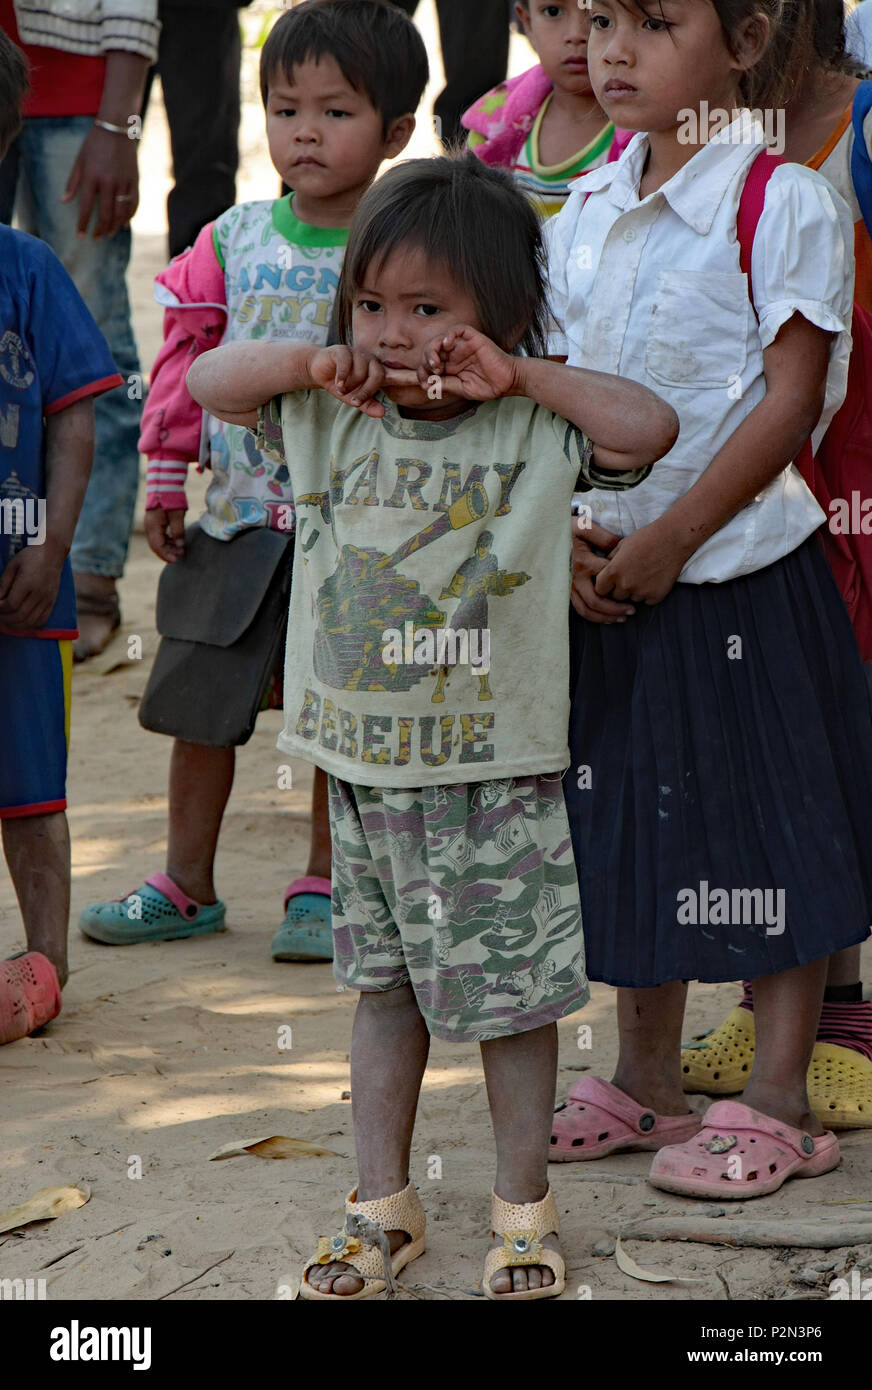 A small bedraggled Cambodian child waits in line with other children at Ream local school, Sihanouk province. Stock Photo